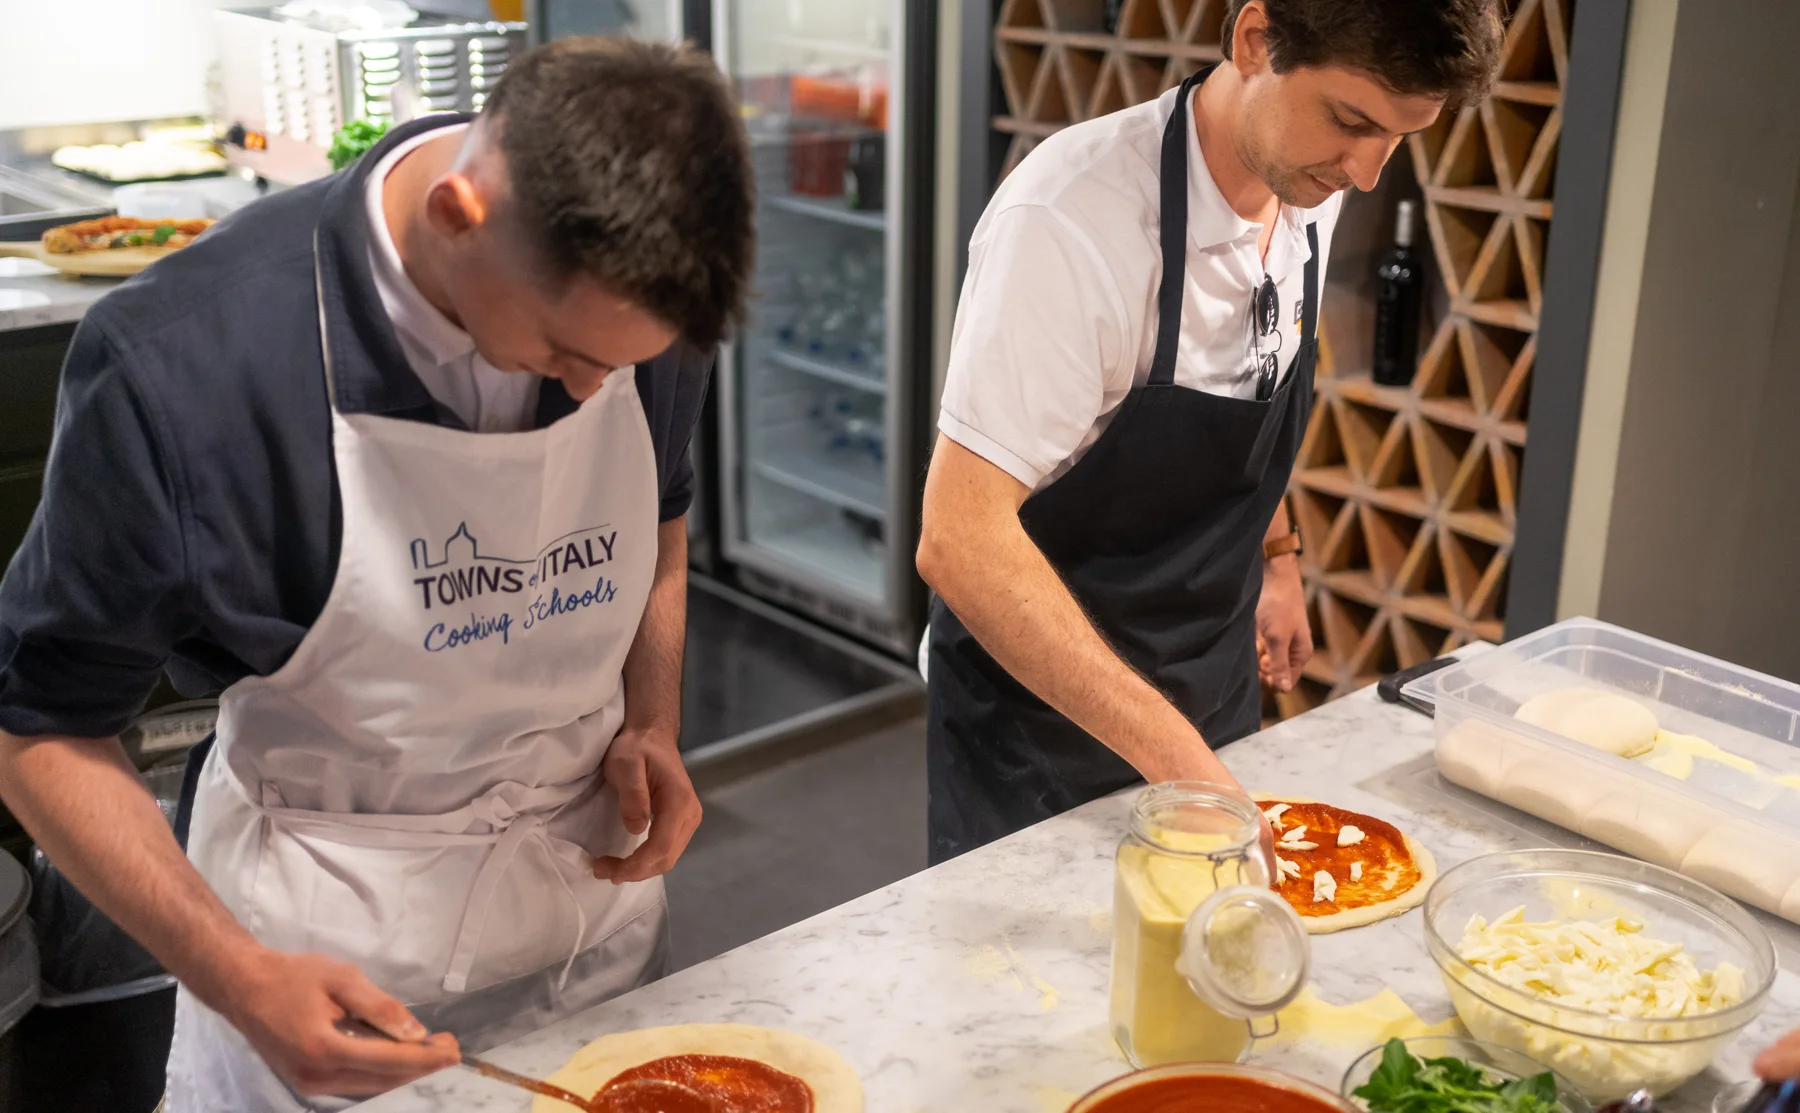 Gelato and pizza making class in downtown Milan - 1519402